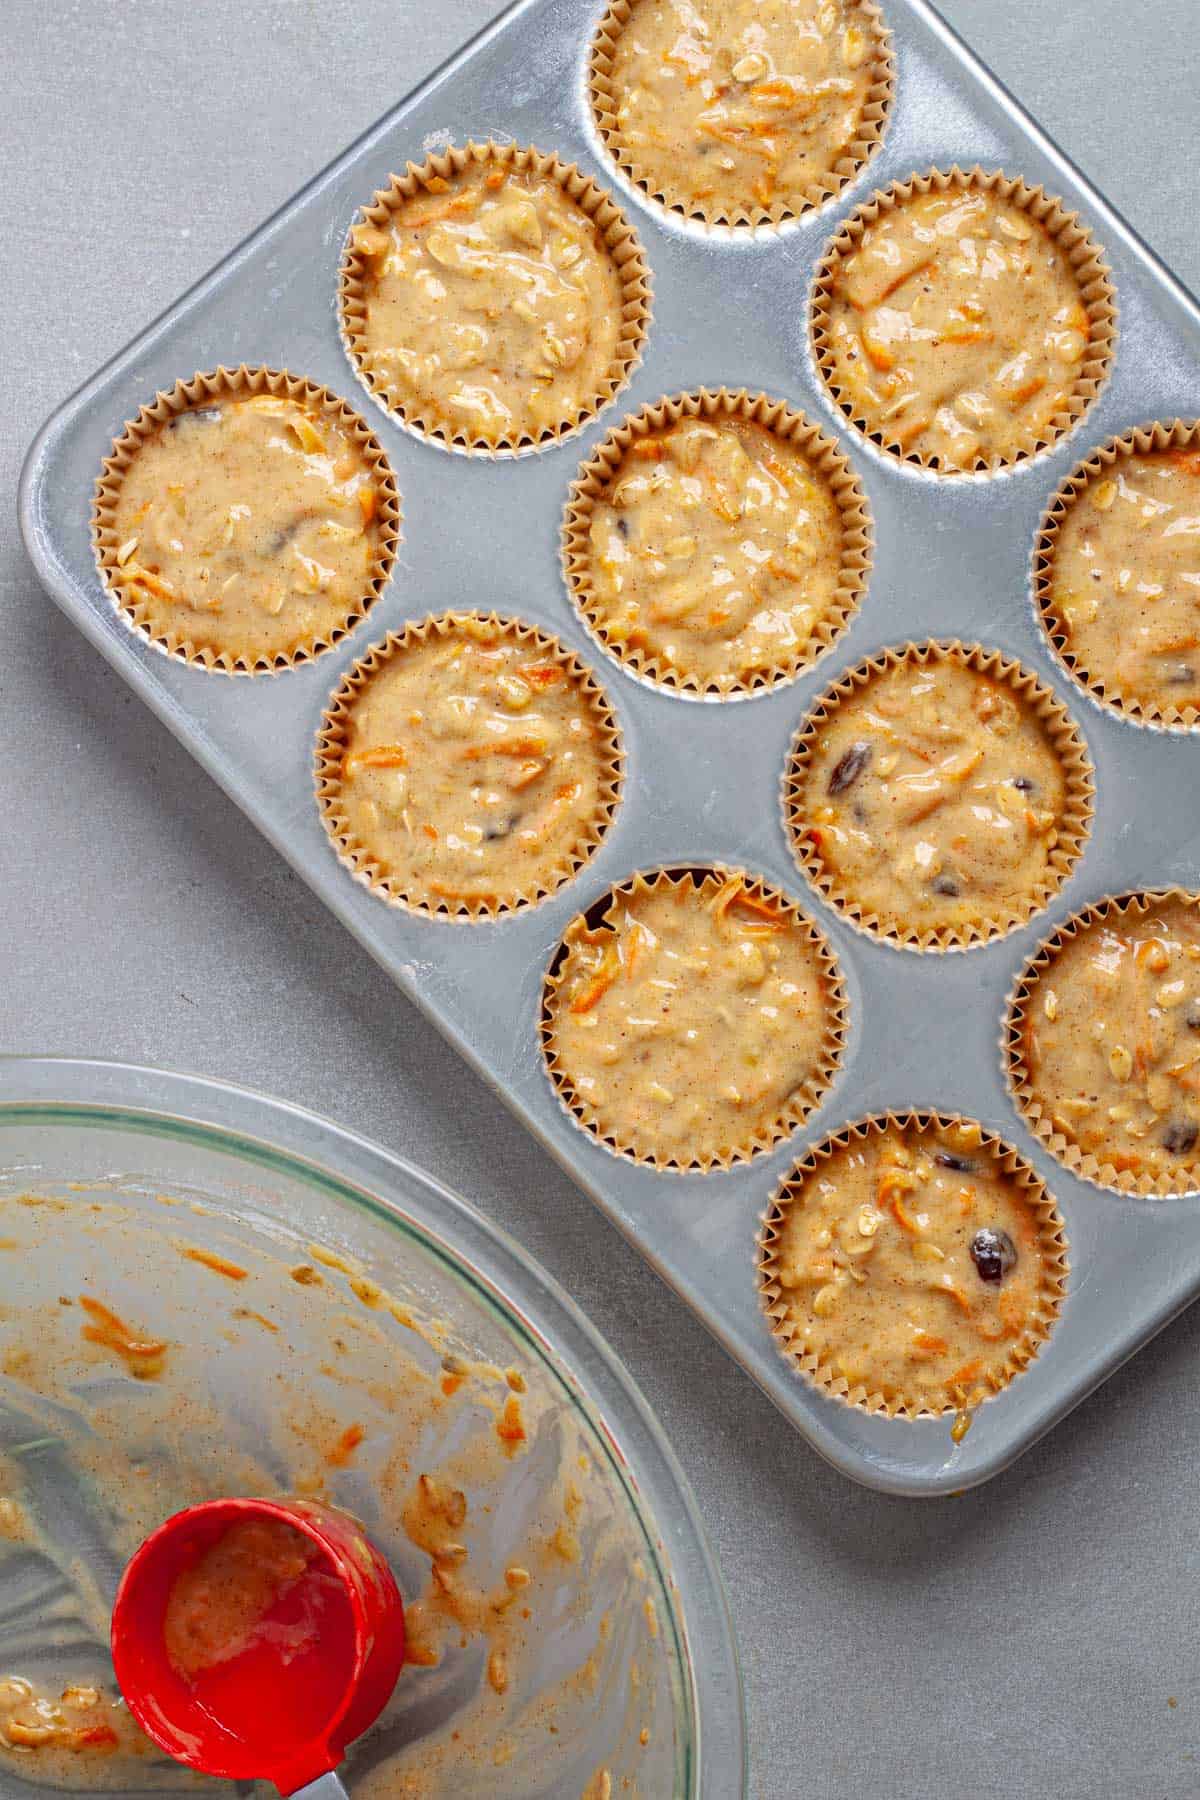 A muffin tin filled with carrot and banana muffin batter.